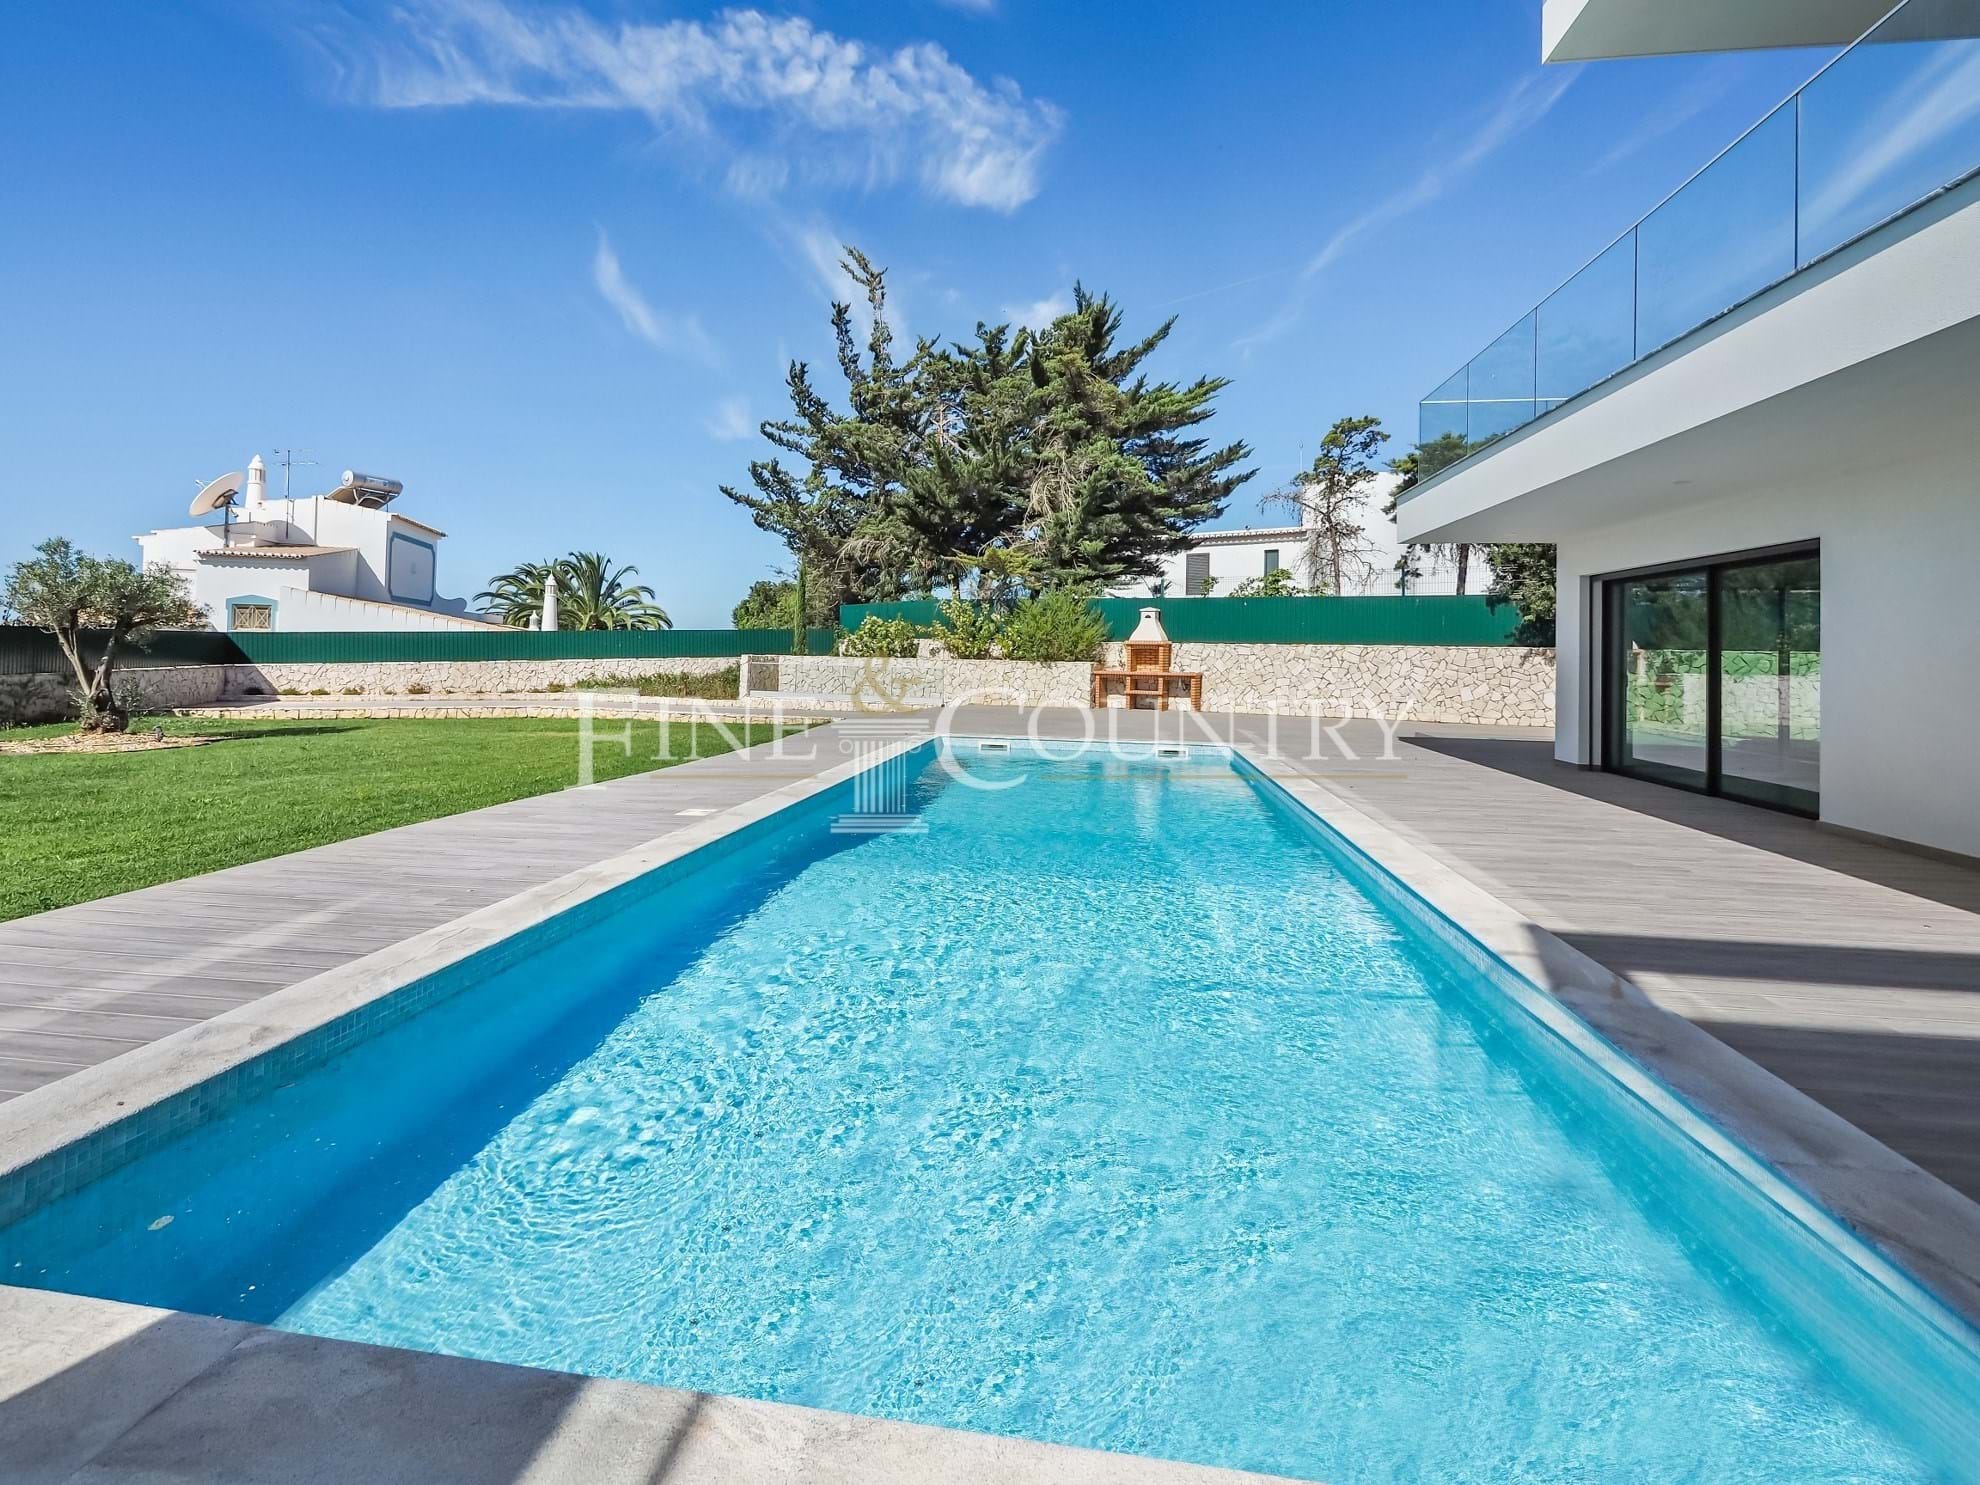 Ferragudo - Brand new 4-bedroom modern villa with pool, large garage and sea views Accommodation in Lagoa